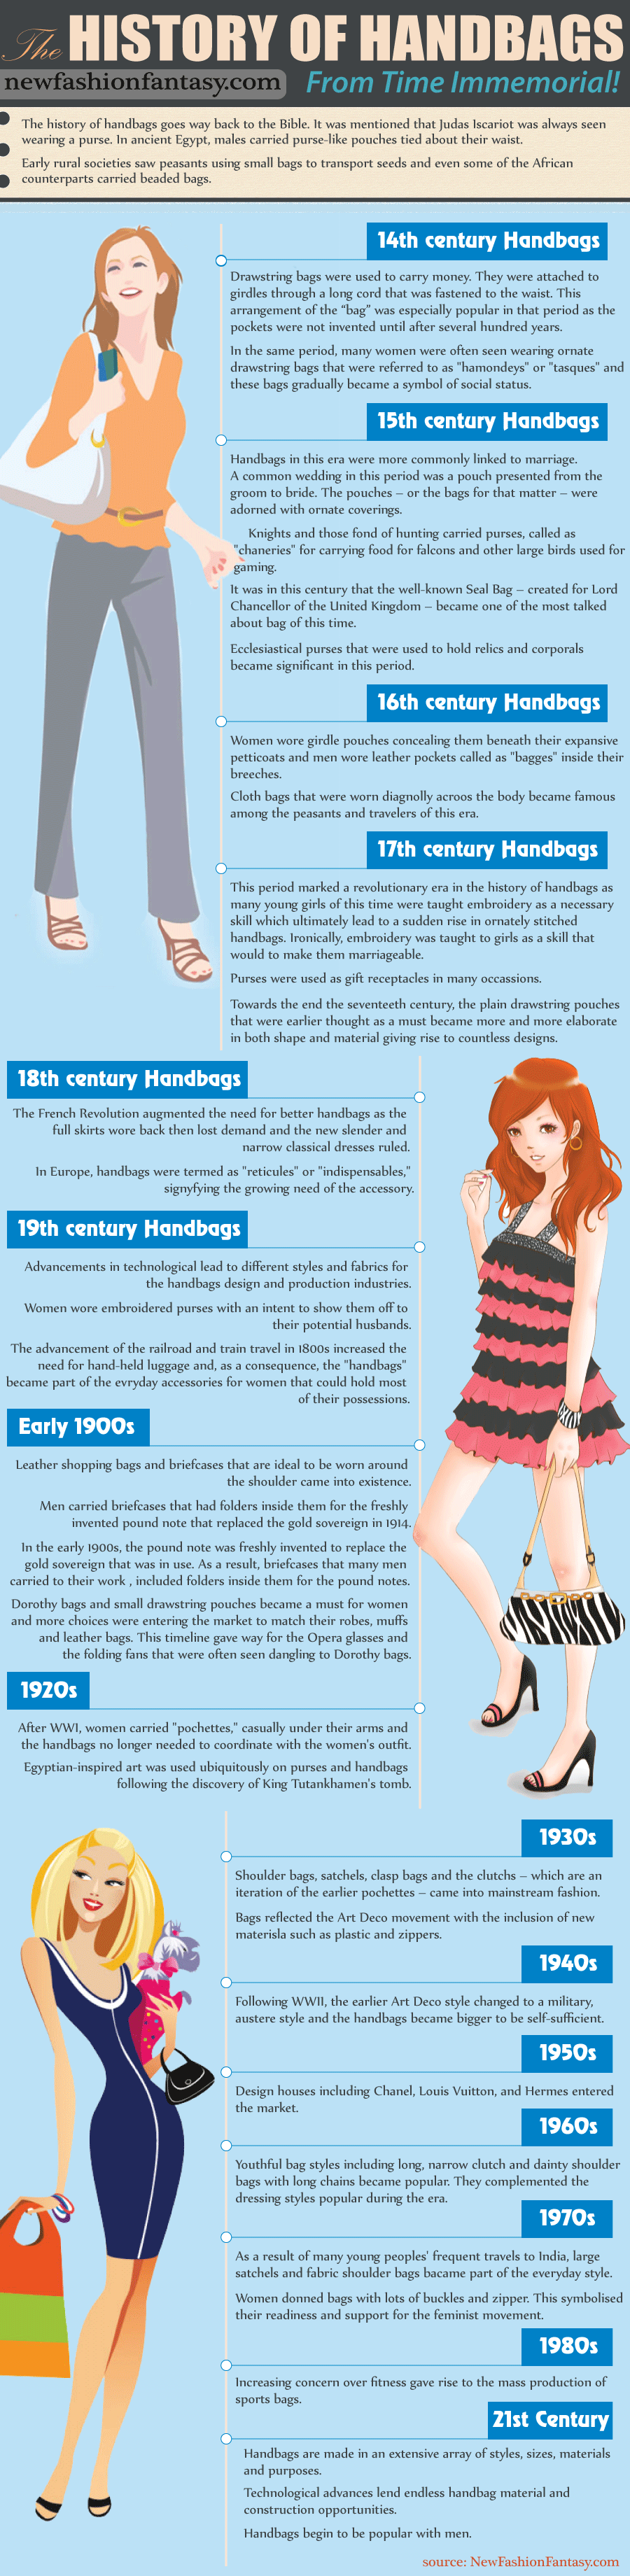 The History of Handbags From Time Immemorial! Infographic